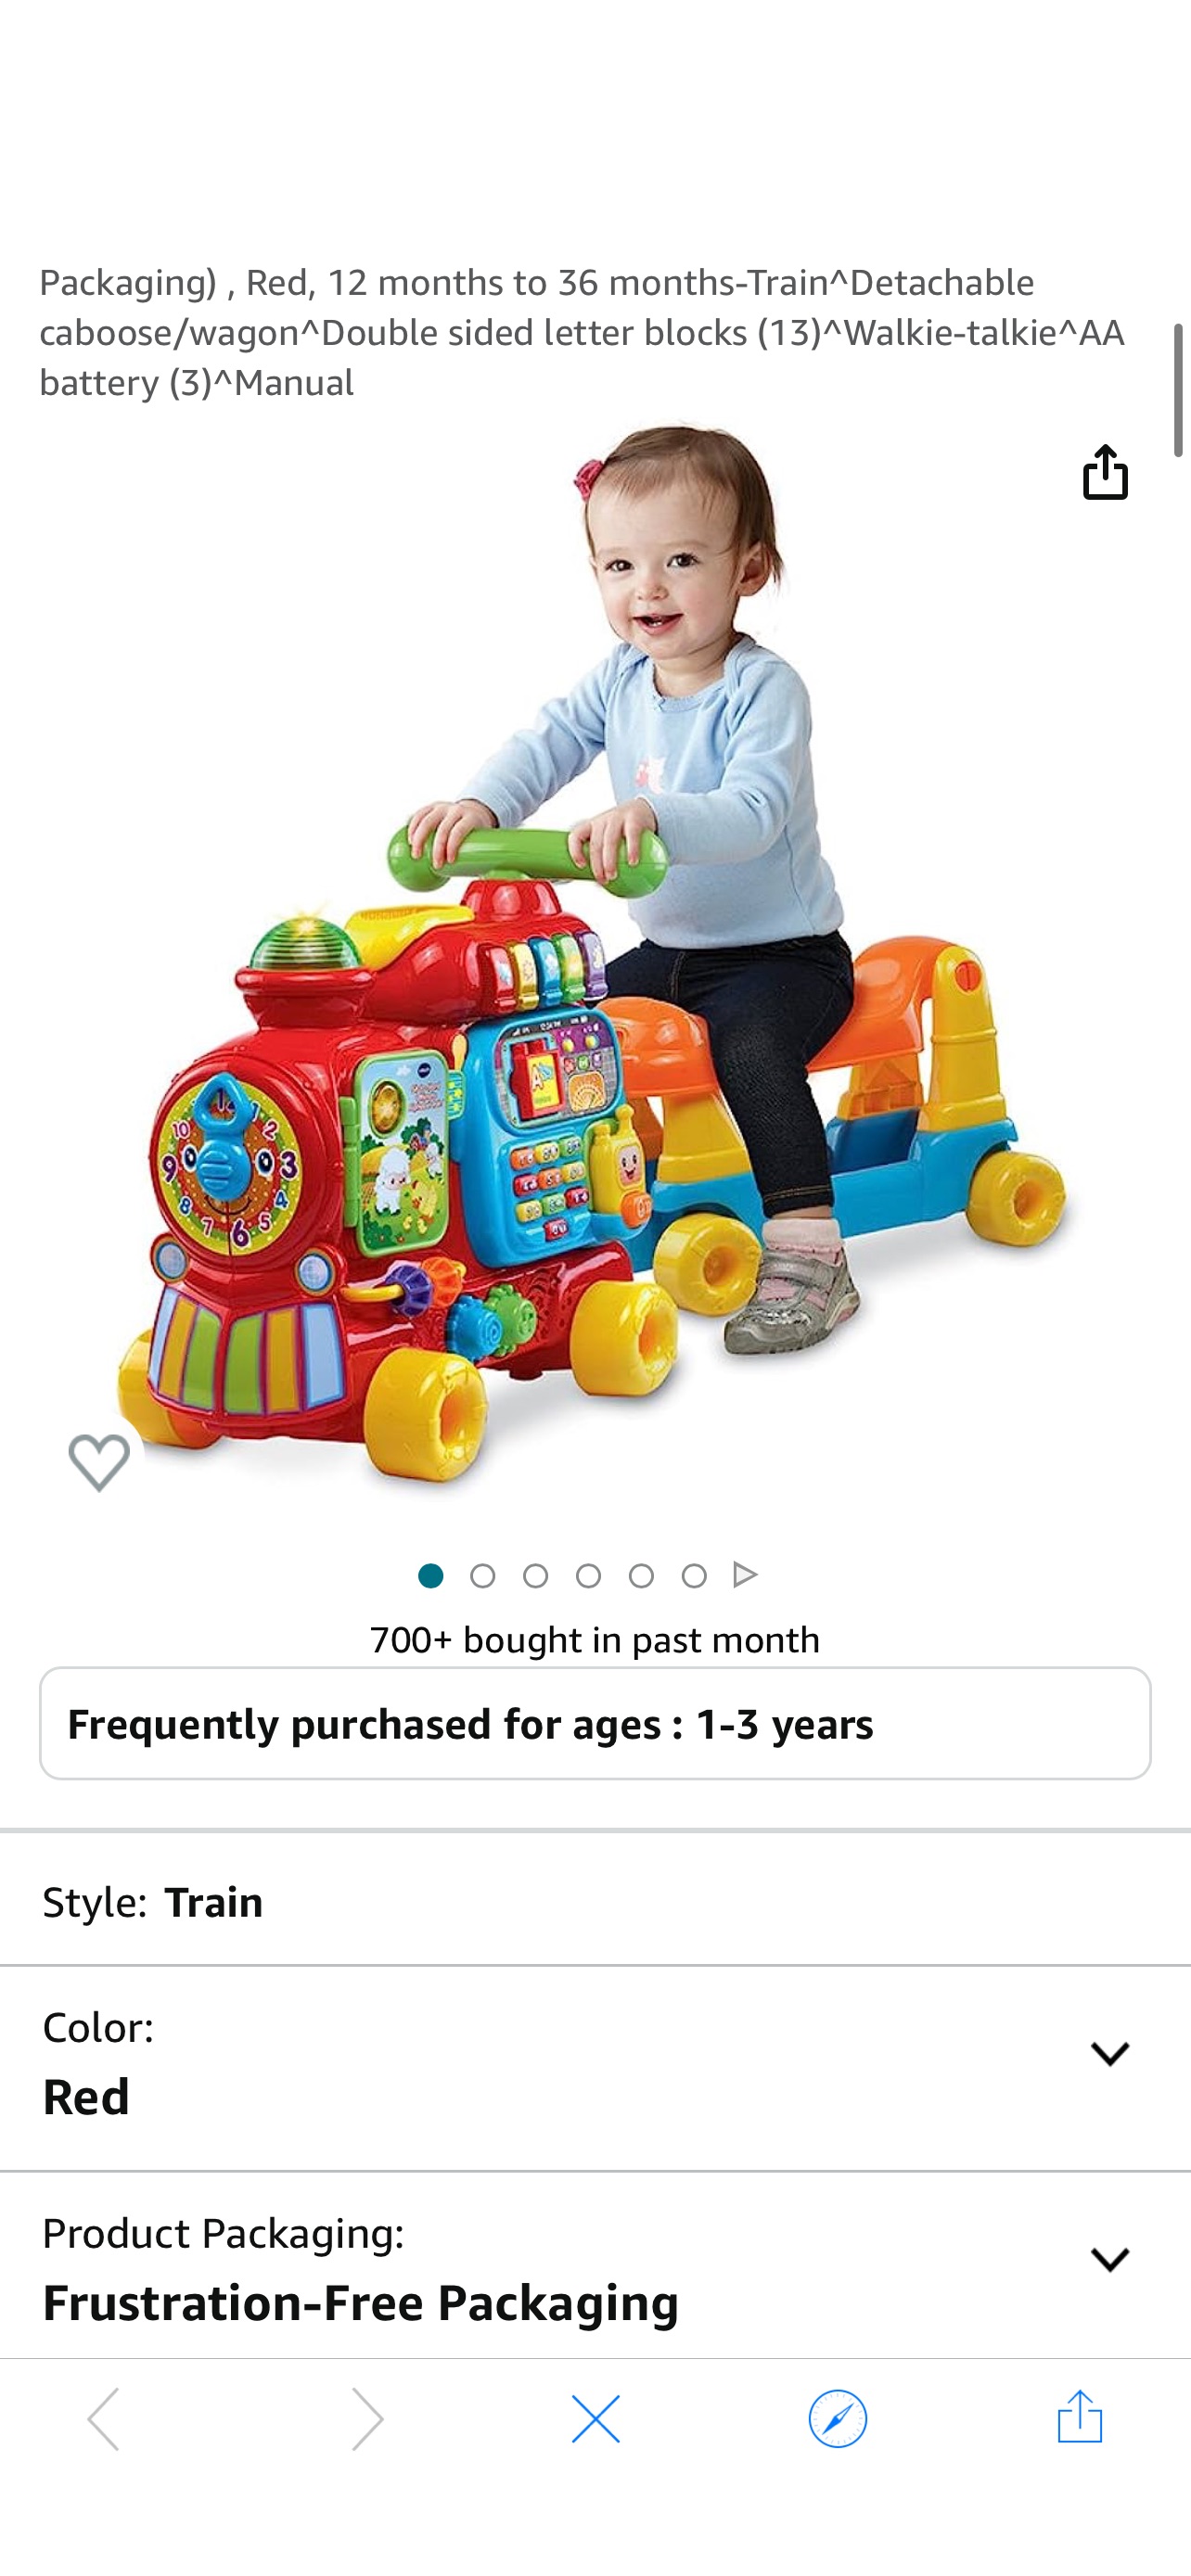 Amazon.com: VTech Sit-To-Stand Ultimate Alphabet Train (Frustration Free Packaging) , Red, 12 months to 36 months-Train^Detachable caboose/wagon^Double sided letter blocks (13)^Walkie-talkie^AA batter